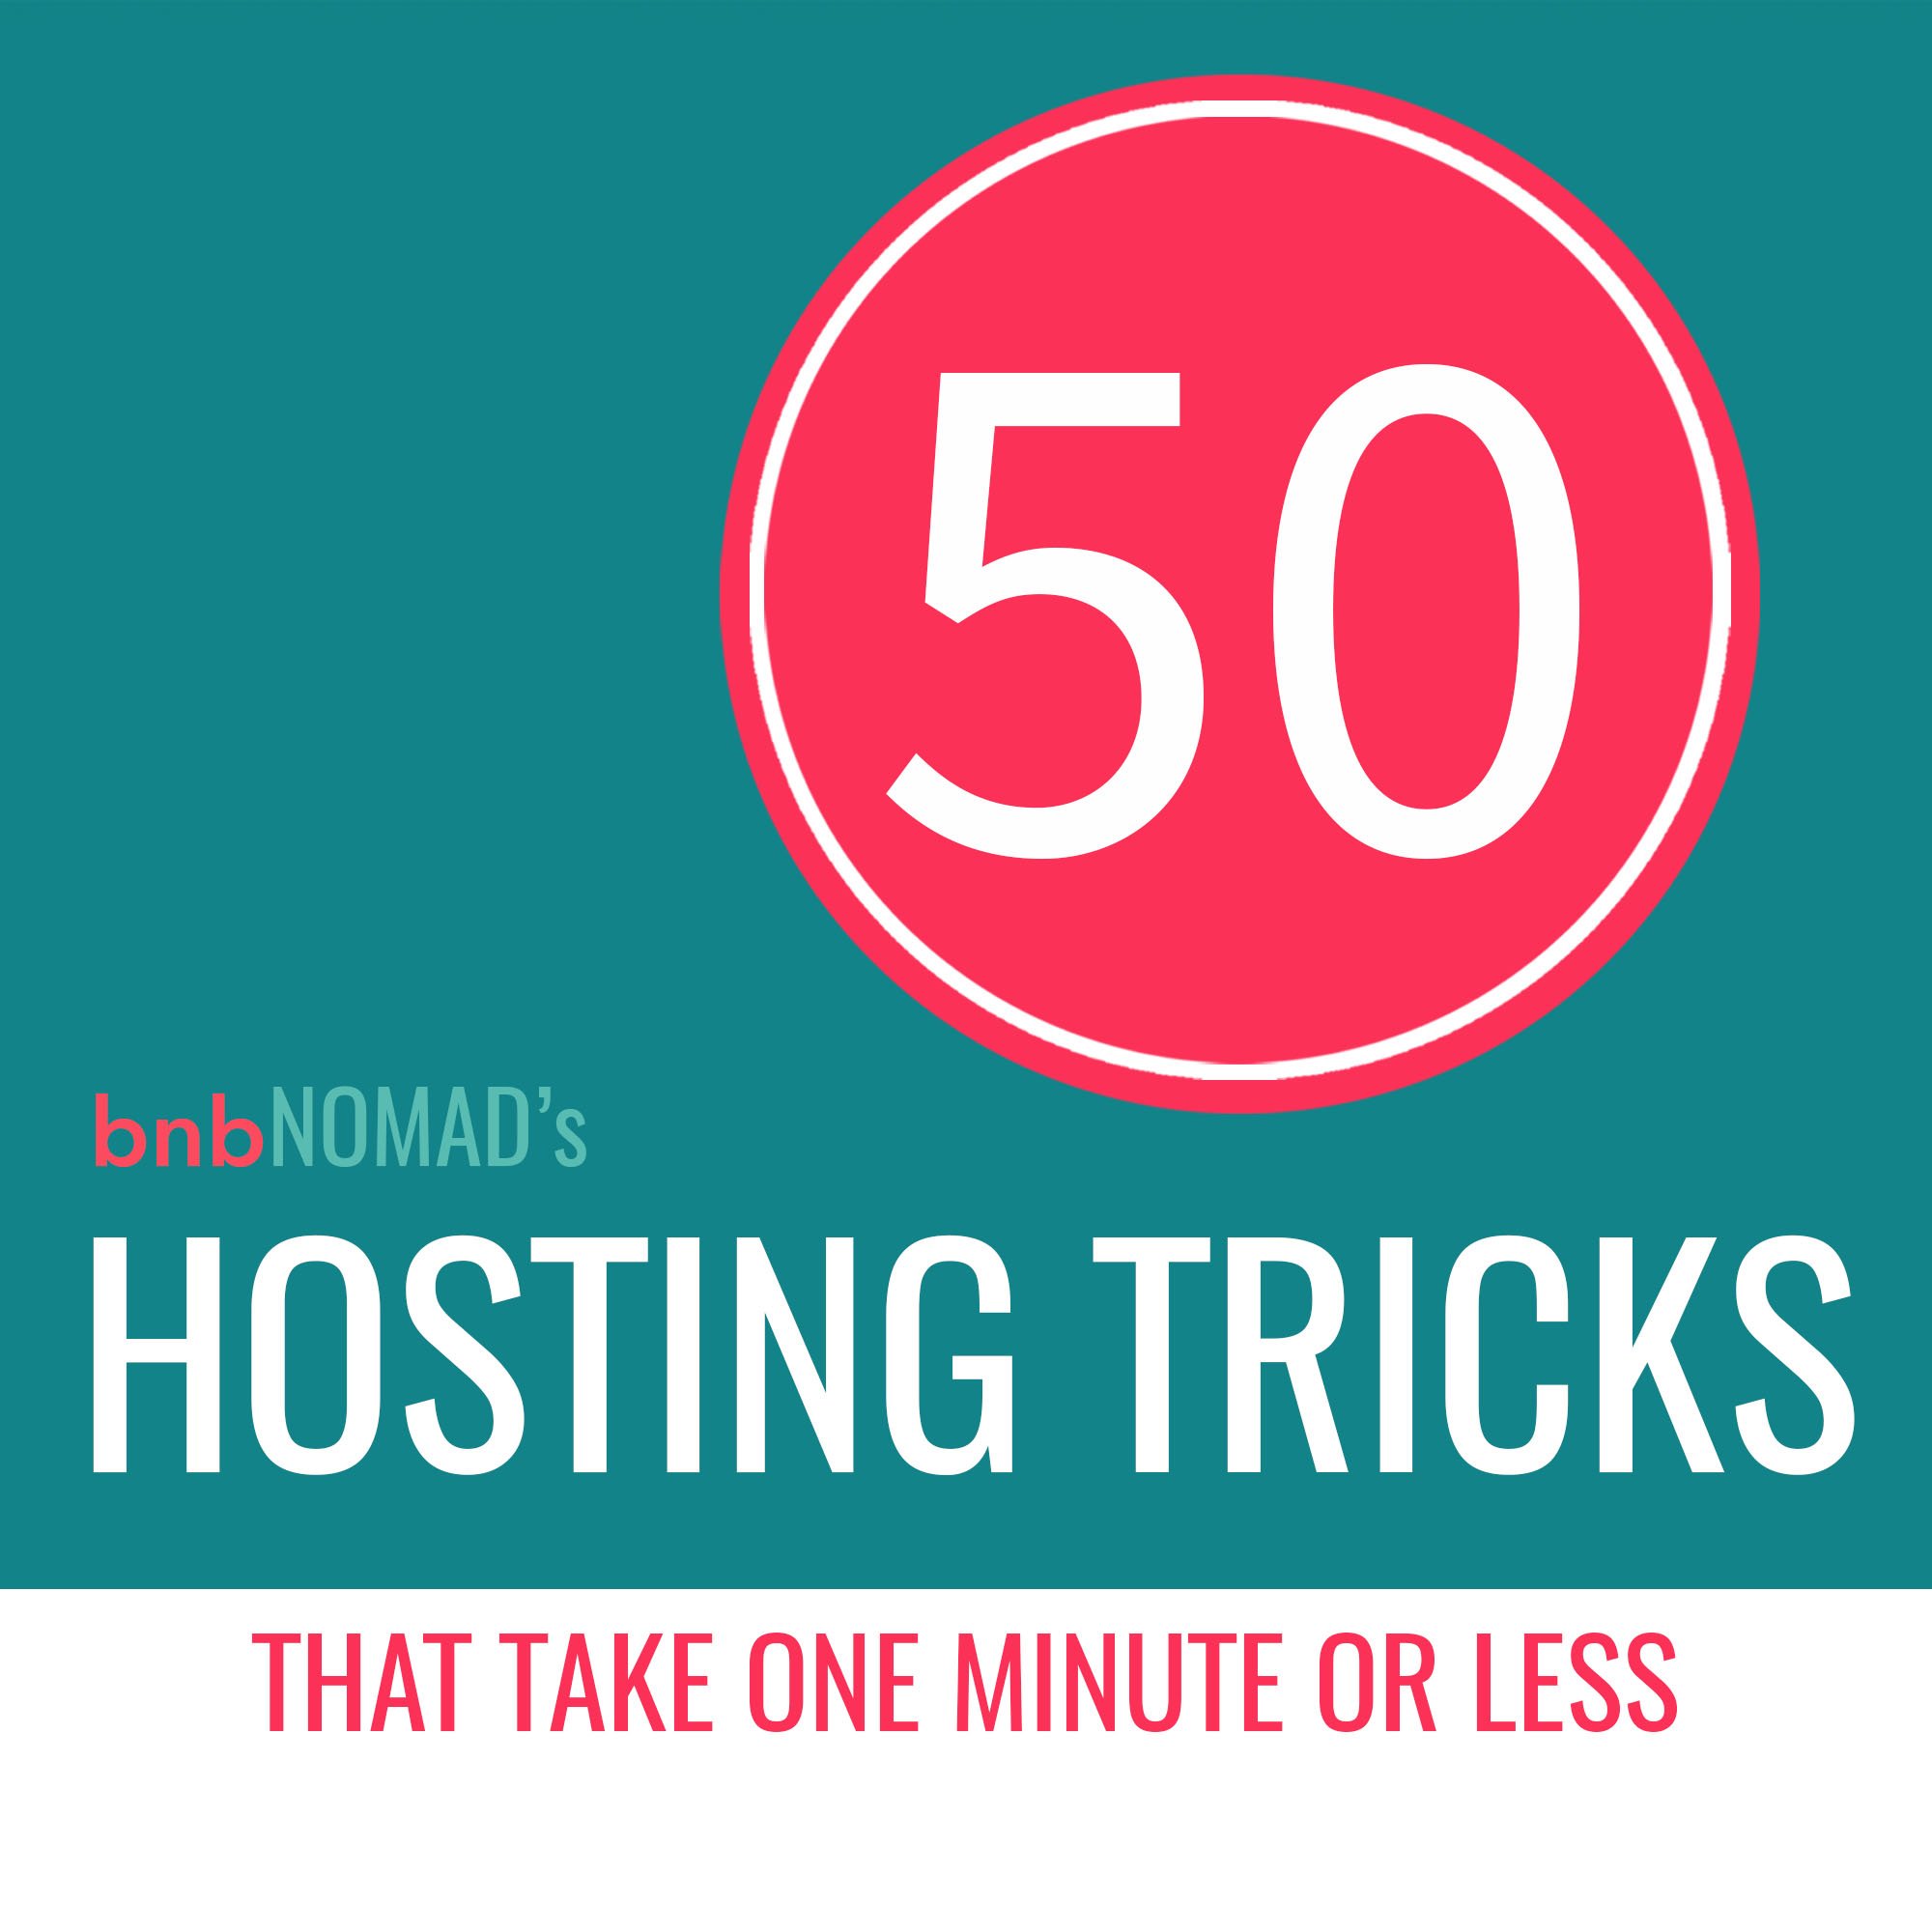 bnbNomad's 50 Airbnb Hosting Tricks that take one minute or less